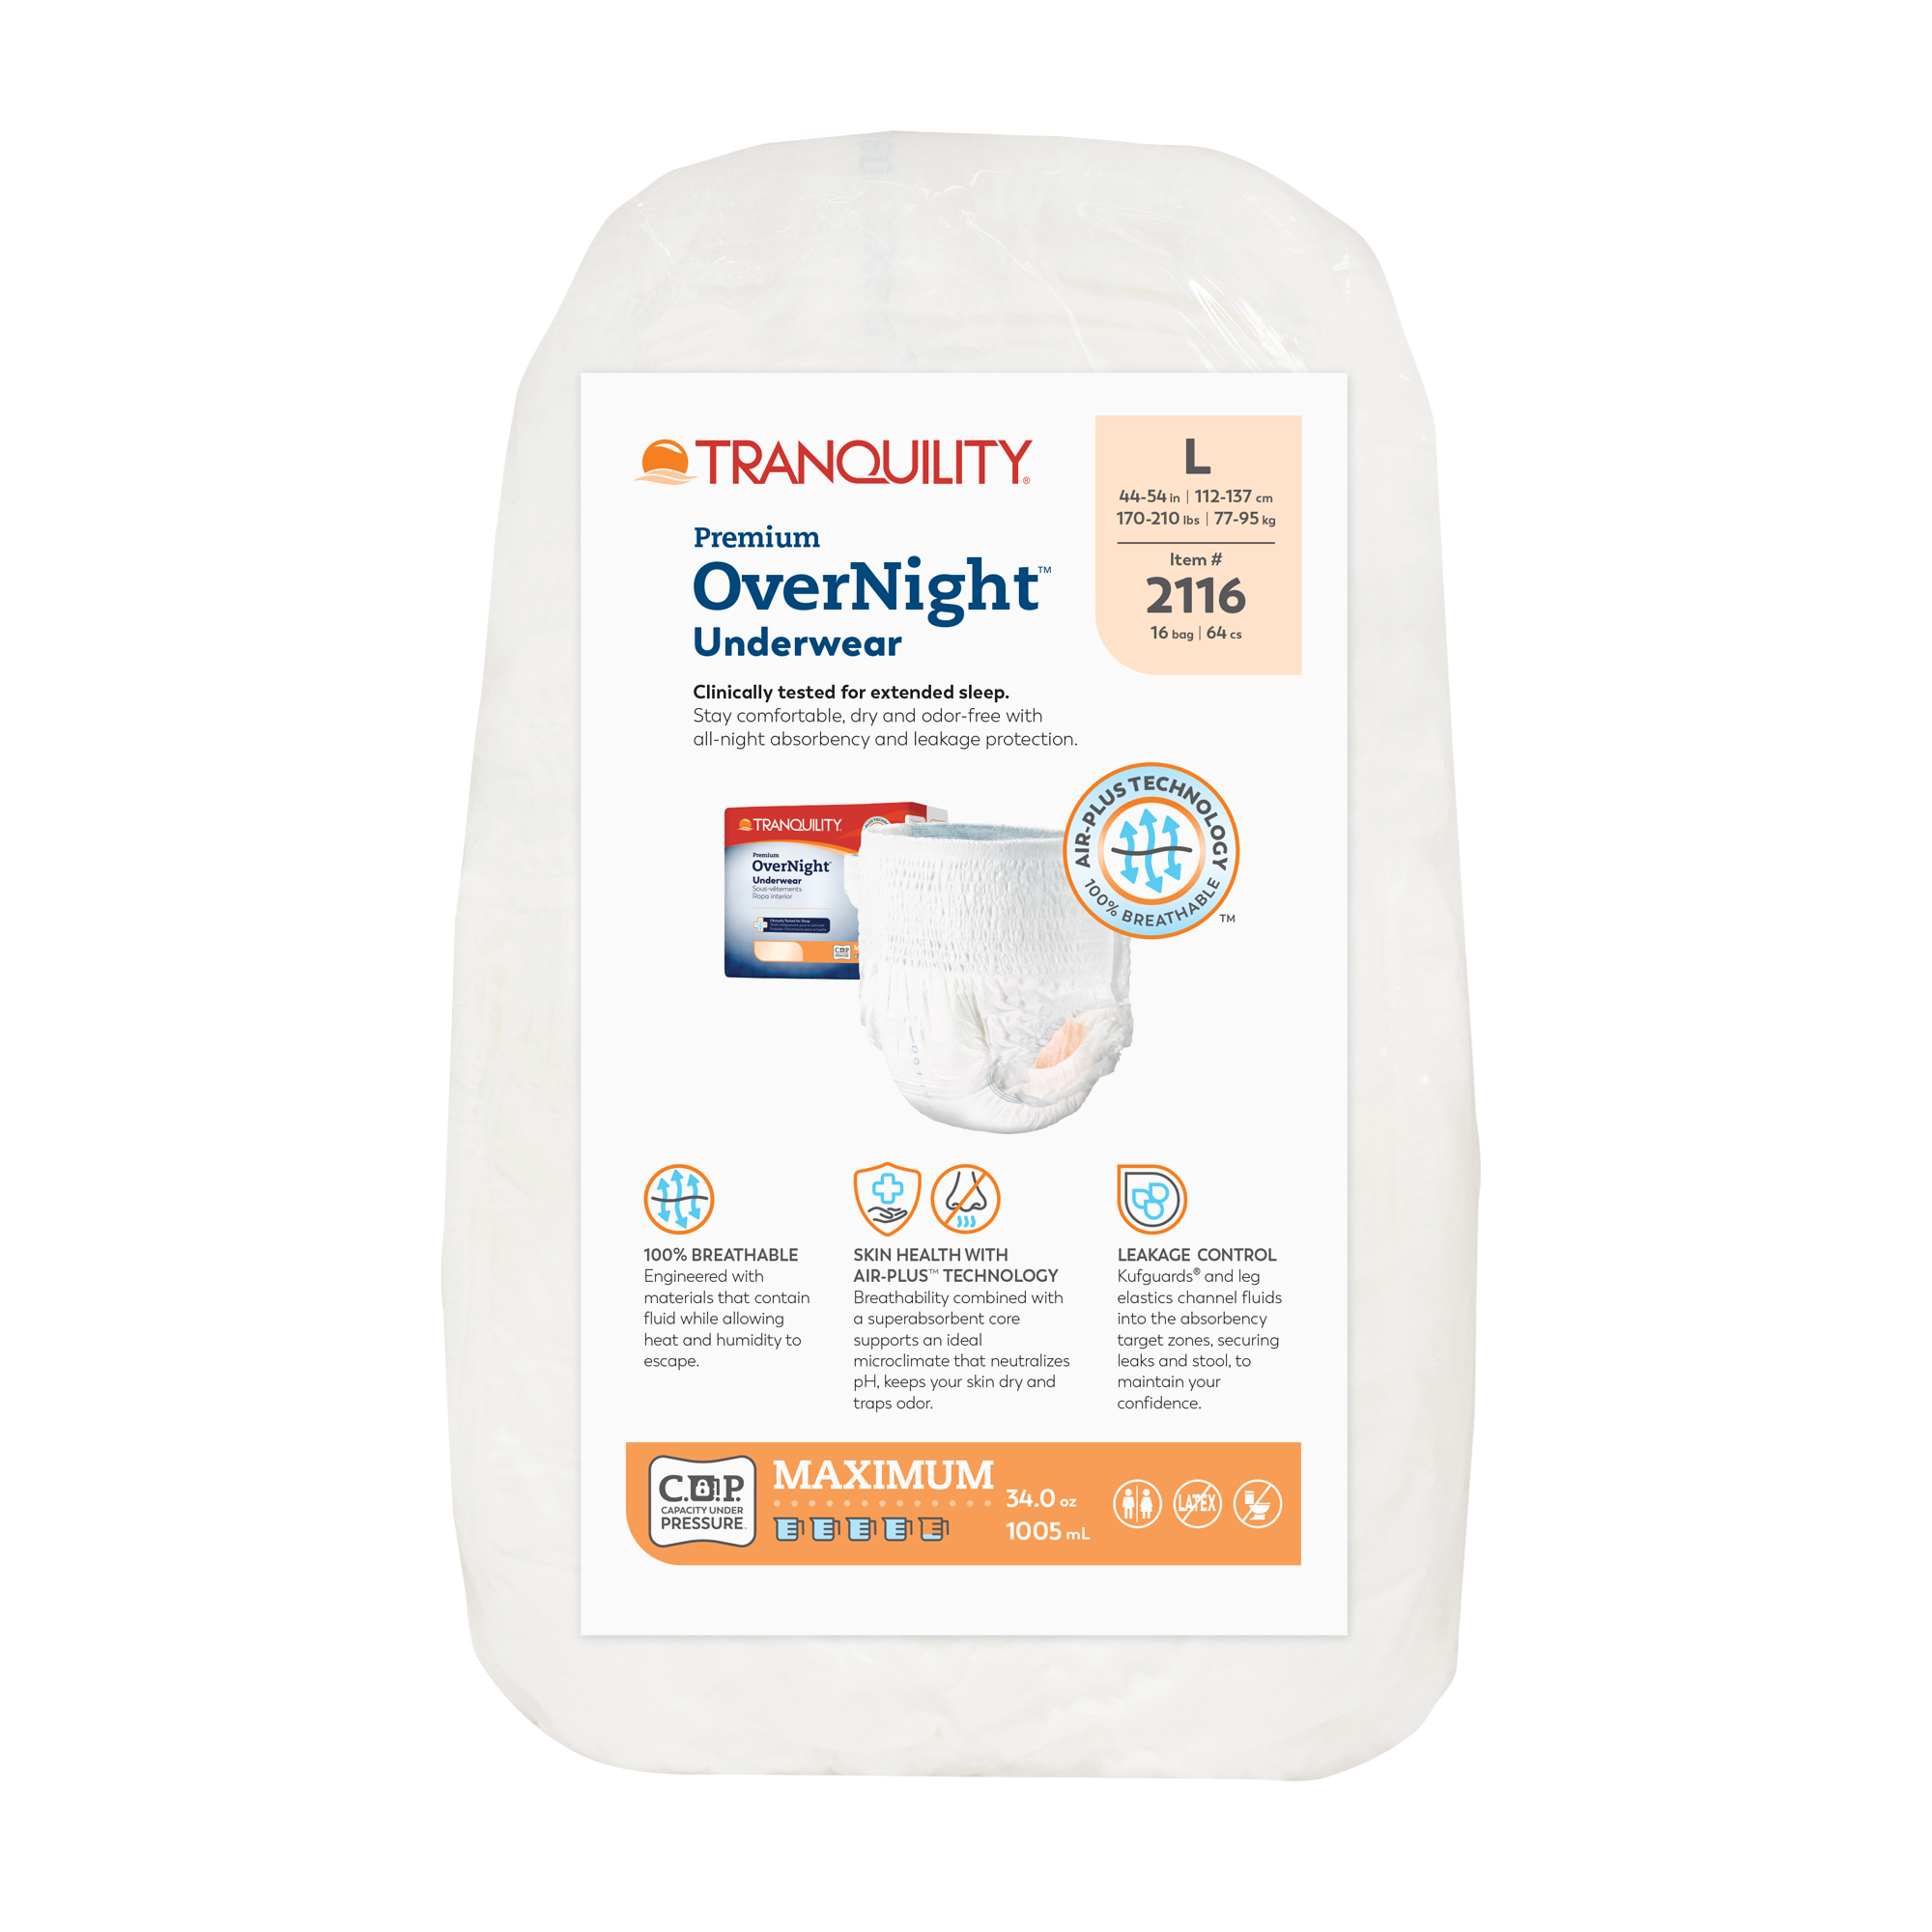 Free Adult Diaper Samples: Tranquility Incontinence Products